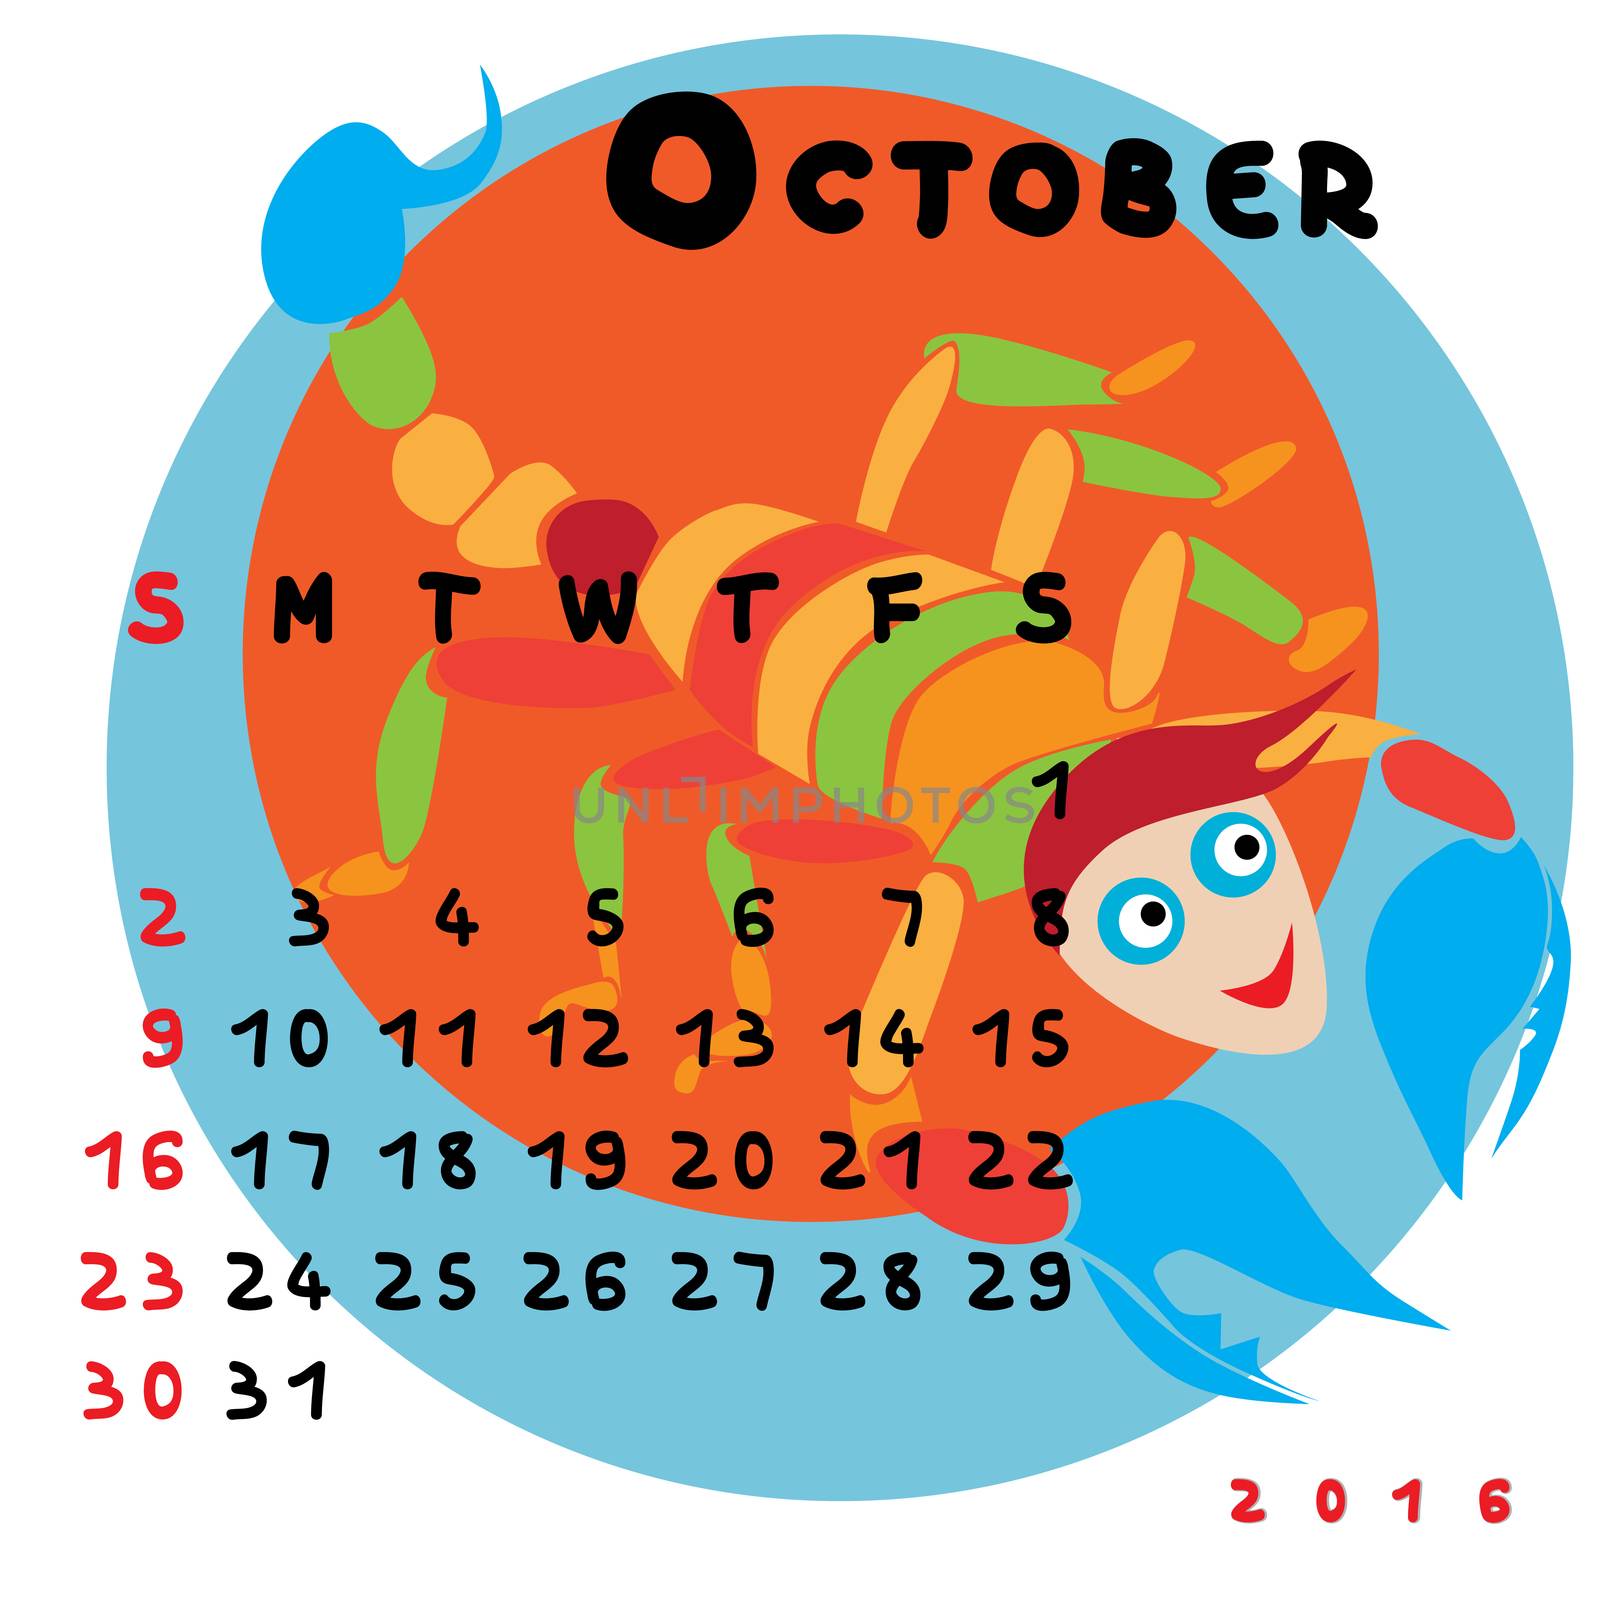 Graphic illustration of the calendar of October 2016 with original hand drawn text and colored clip art of Scorpio zodiac sign